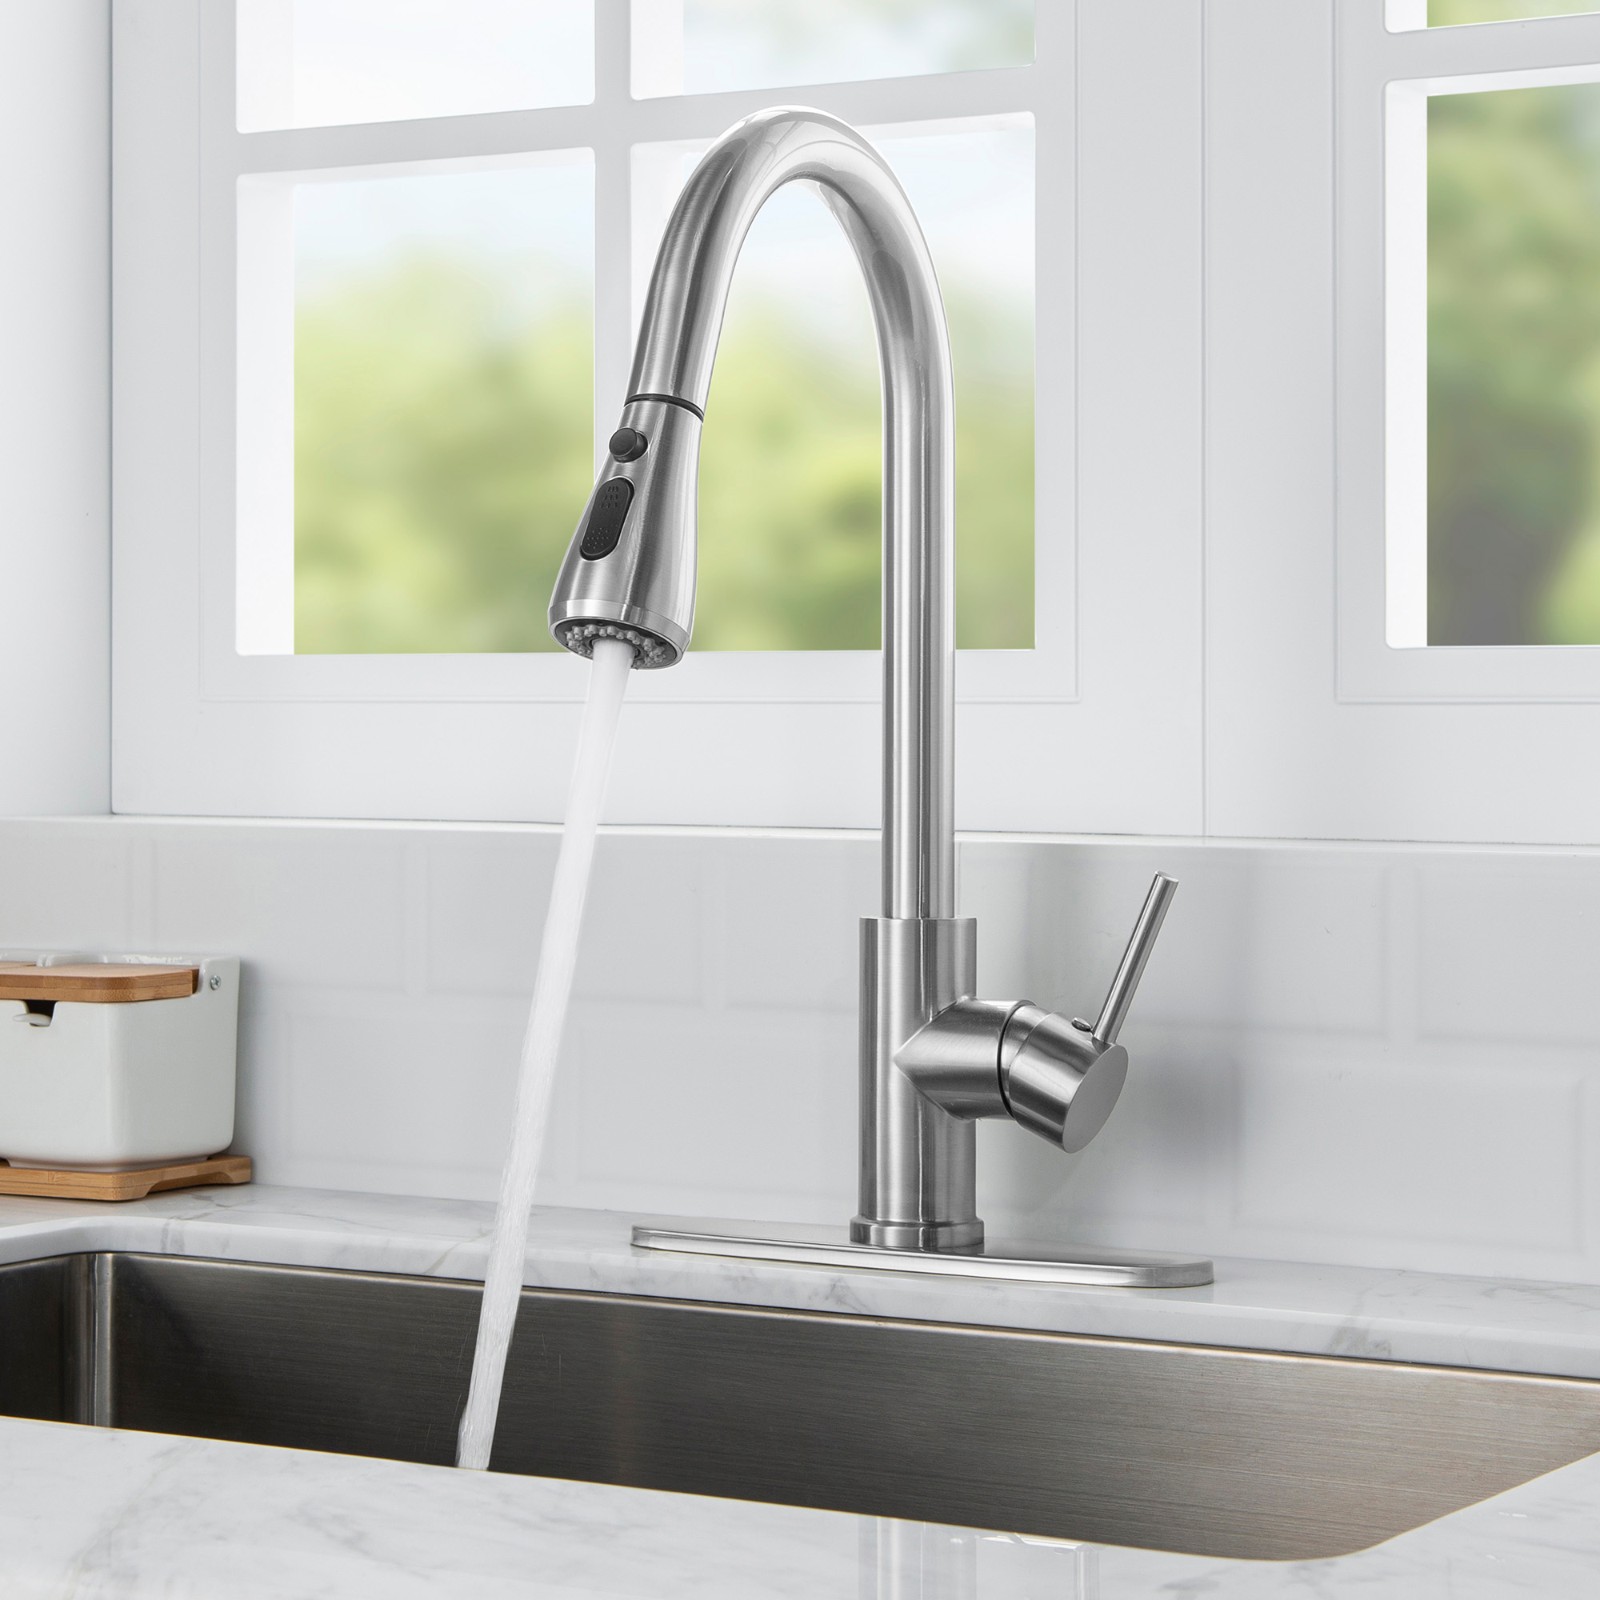  WOODBRIDGE WK090802CH Single Handle Pull Down Kitchen Faucet in Polished Chrome Finish._5022